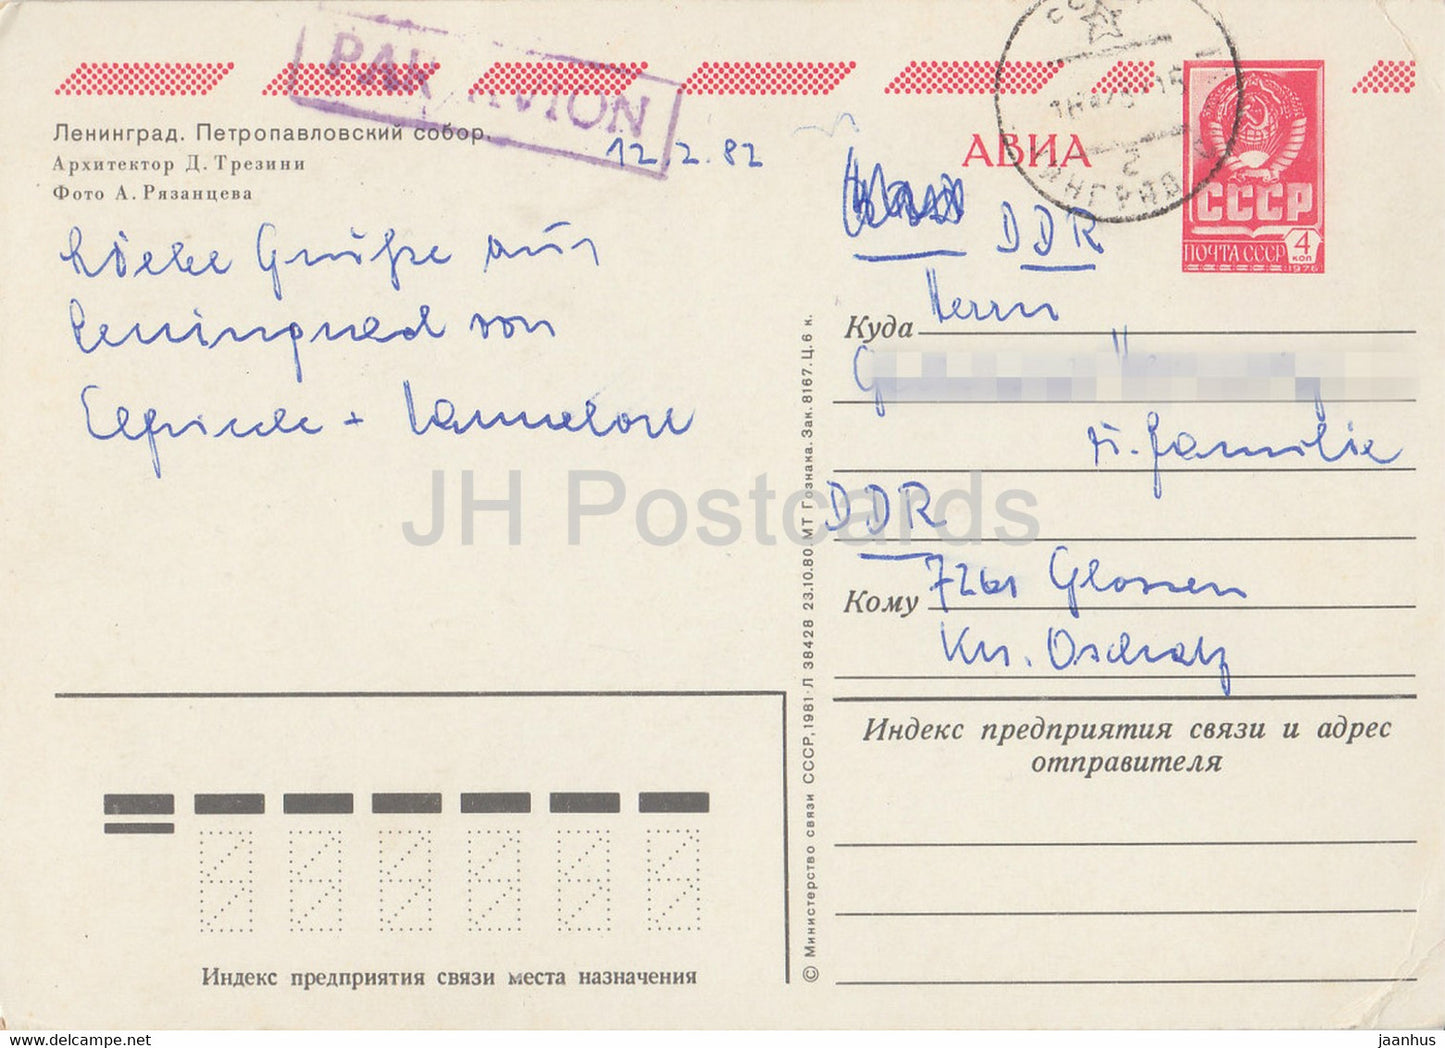 Leningrad - St Petersburg - Peter and Paul Cathedral - AVIA - postal stationery - 1981 - Russia USSR - used